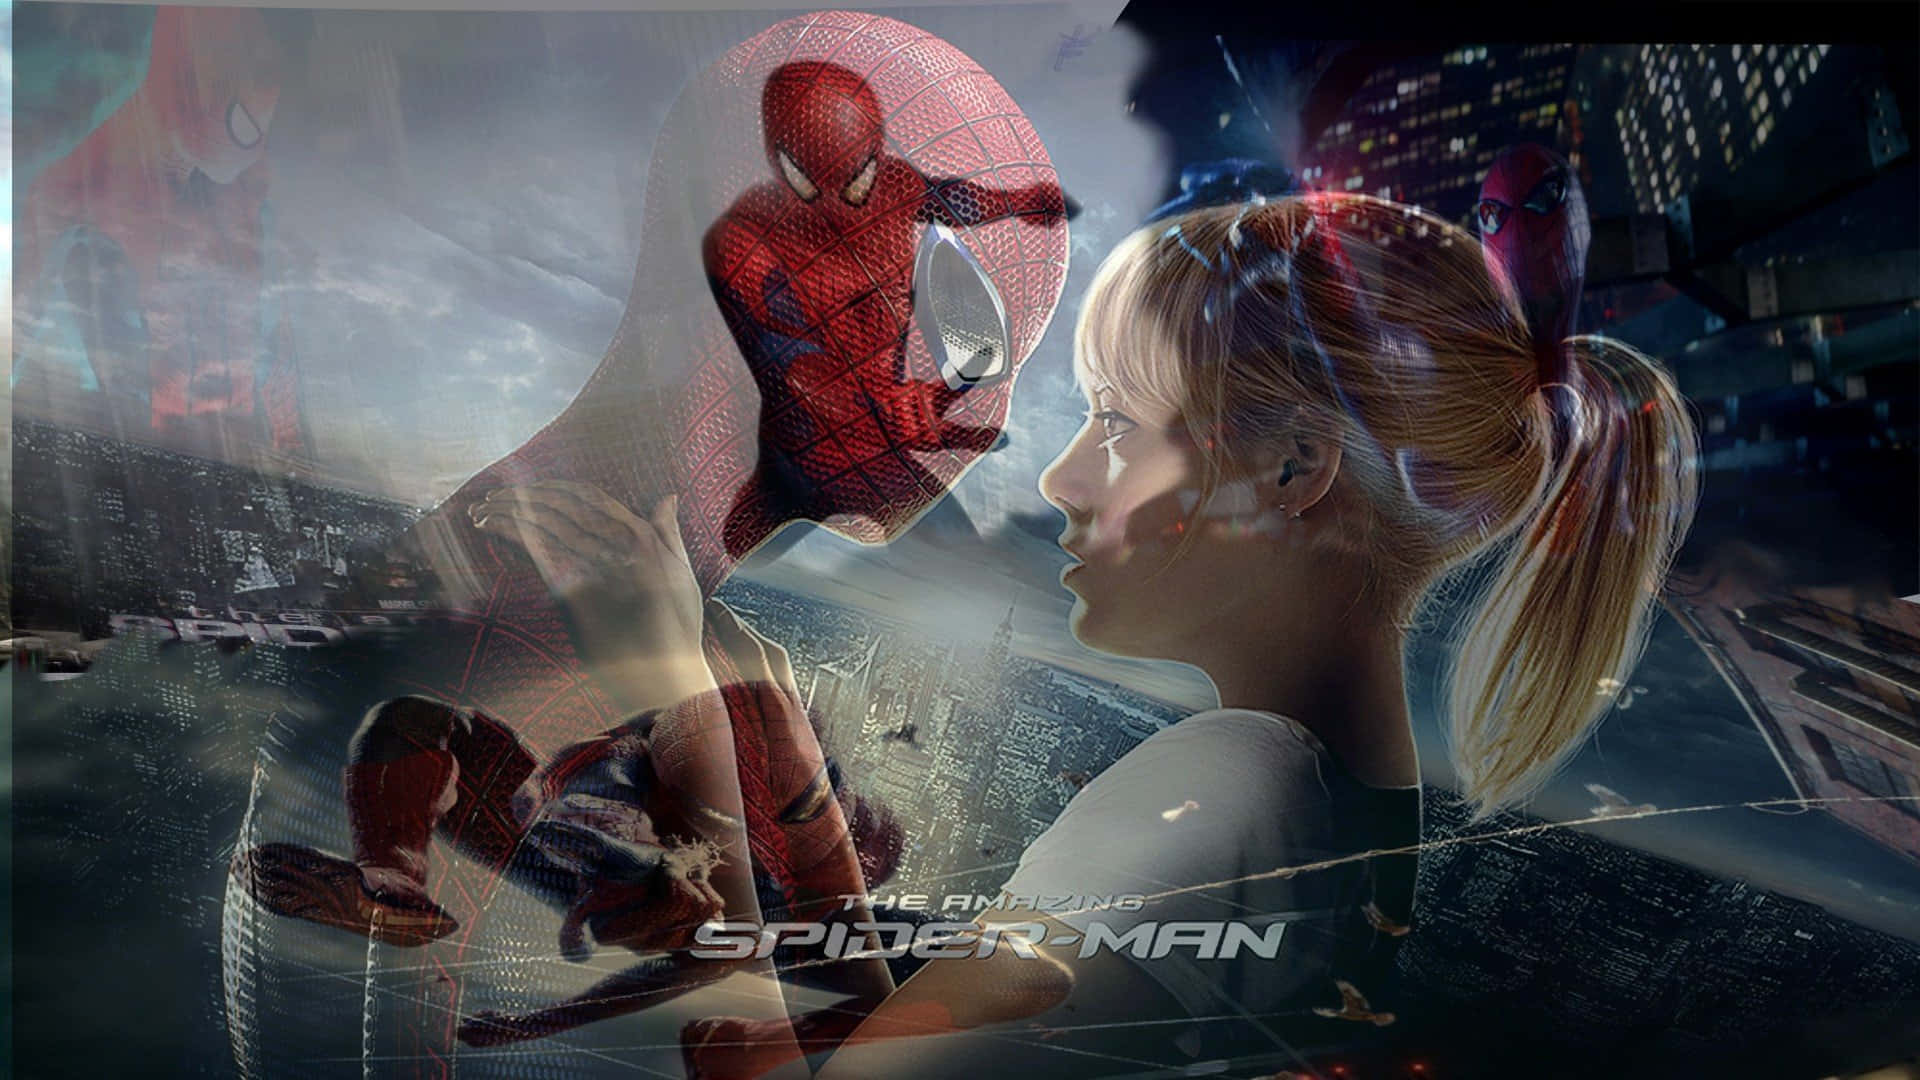 Gwen Stacy in action, swinging through the city Wallpaper